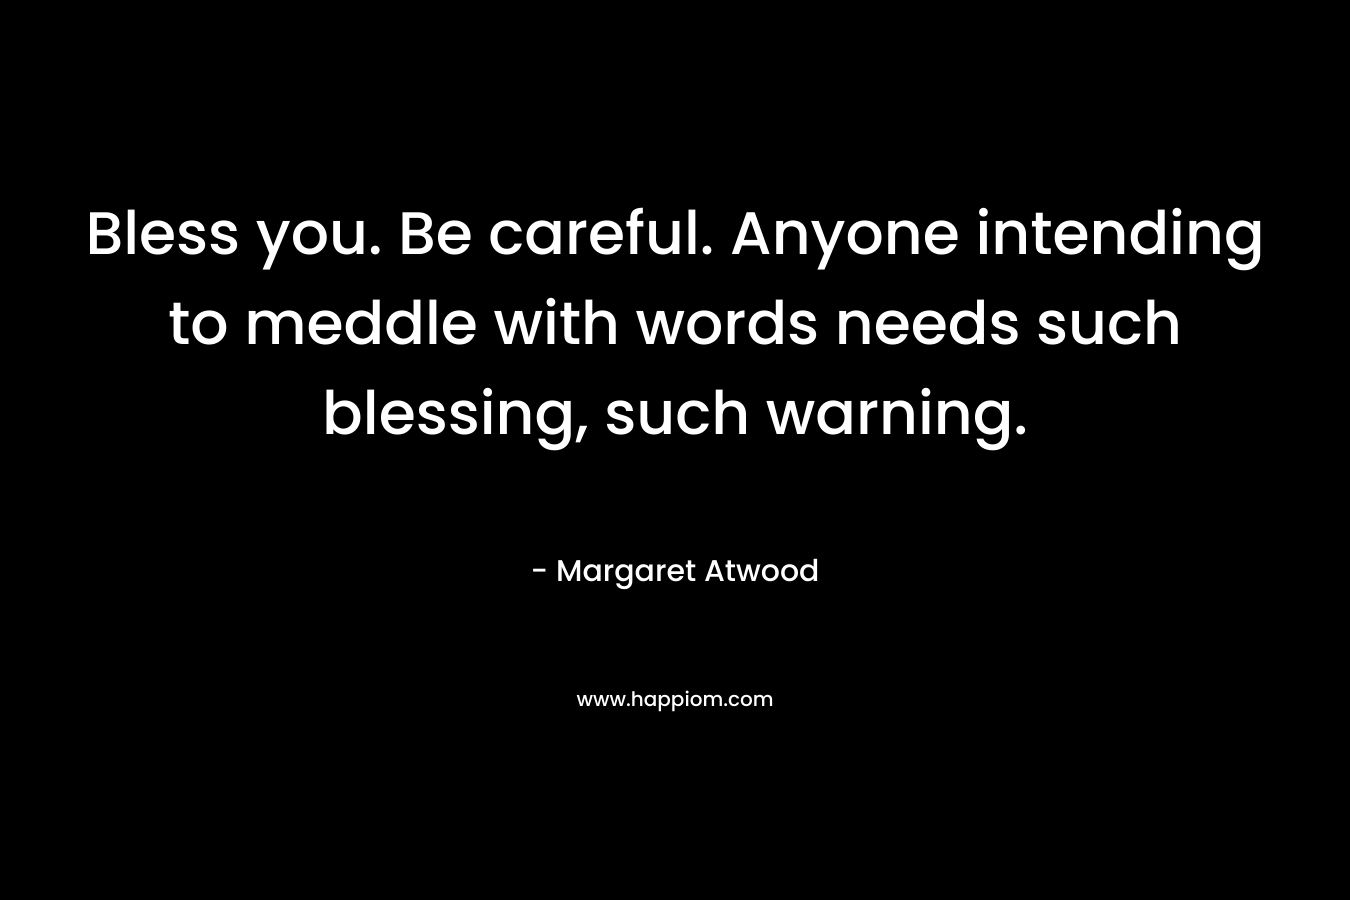 Bless you. Be careful. Anyone intending to meddle with words needs such blessing, such warning. – Margaret Atwood